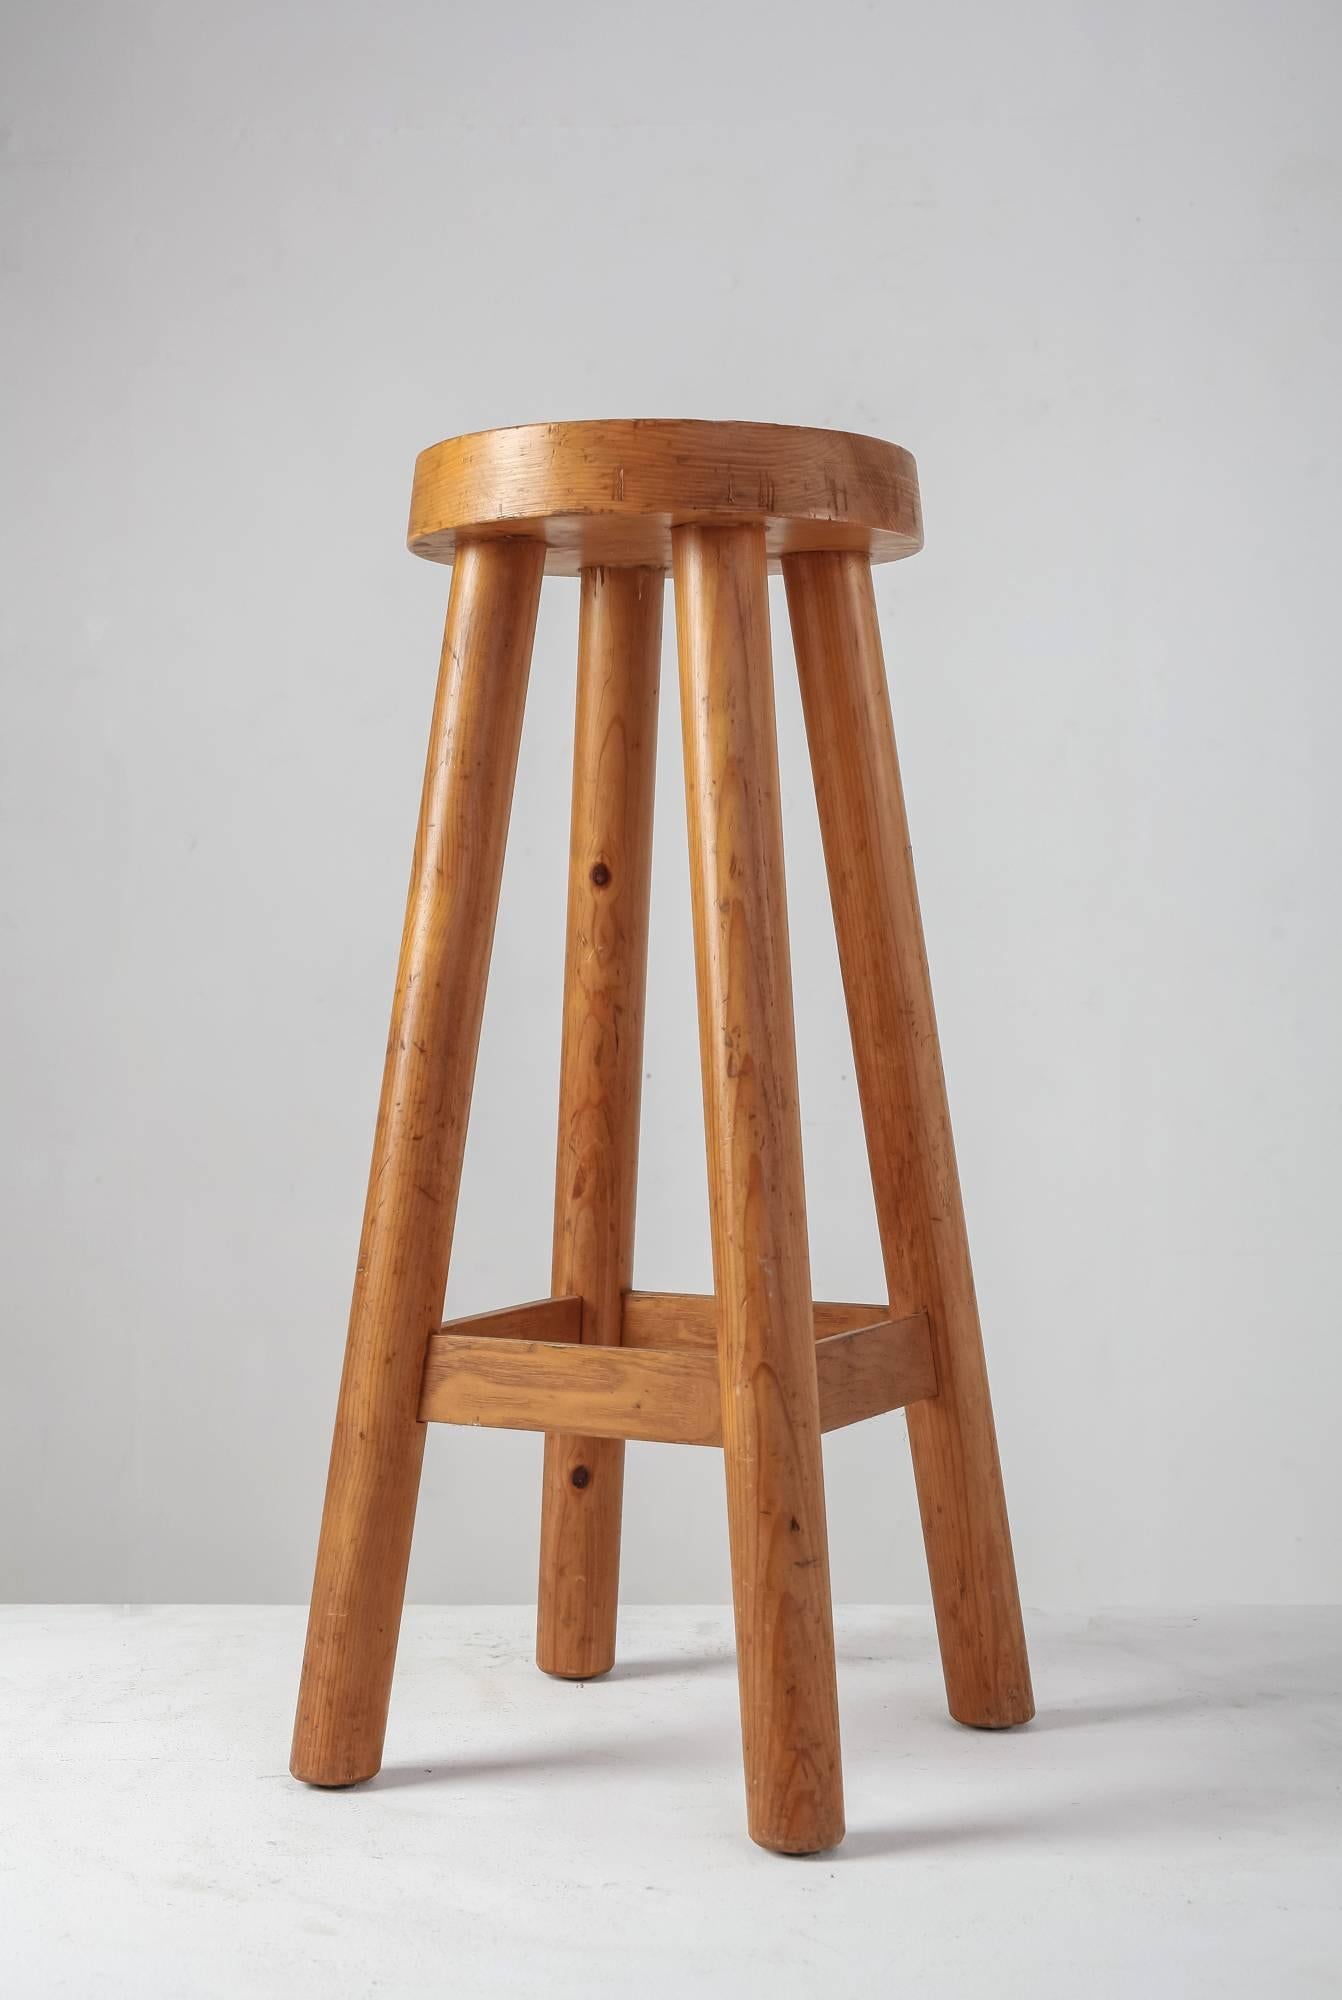 A very rare high pine bar stool in the Campagne style with four legs, by Charlotte Perriand. The round seating has a diameter of 28.5 cm (11